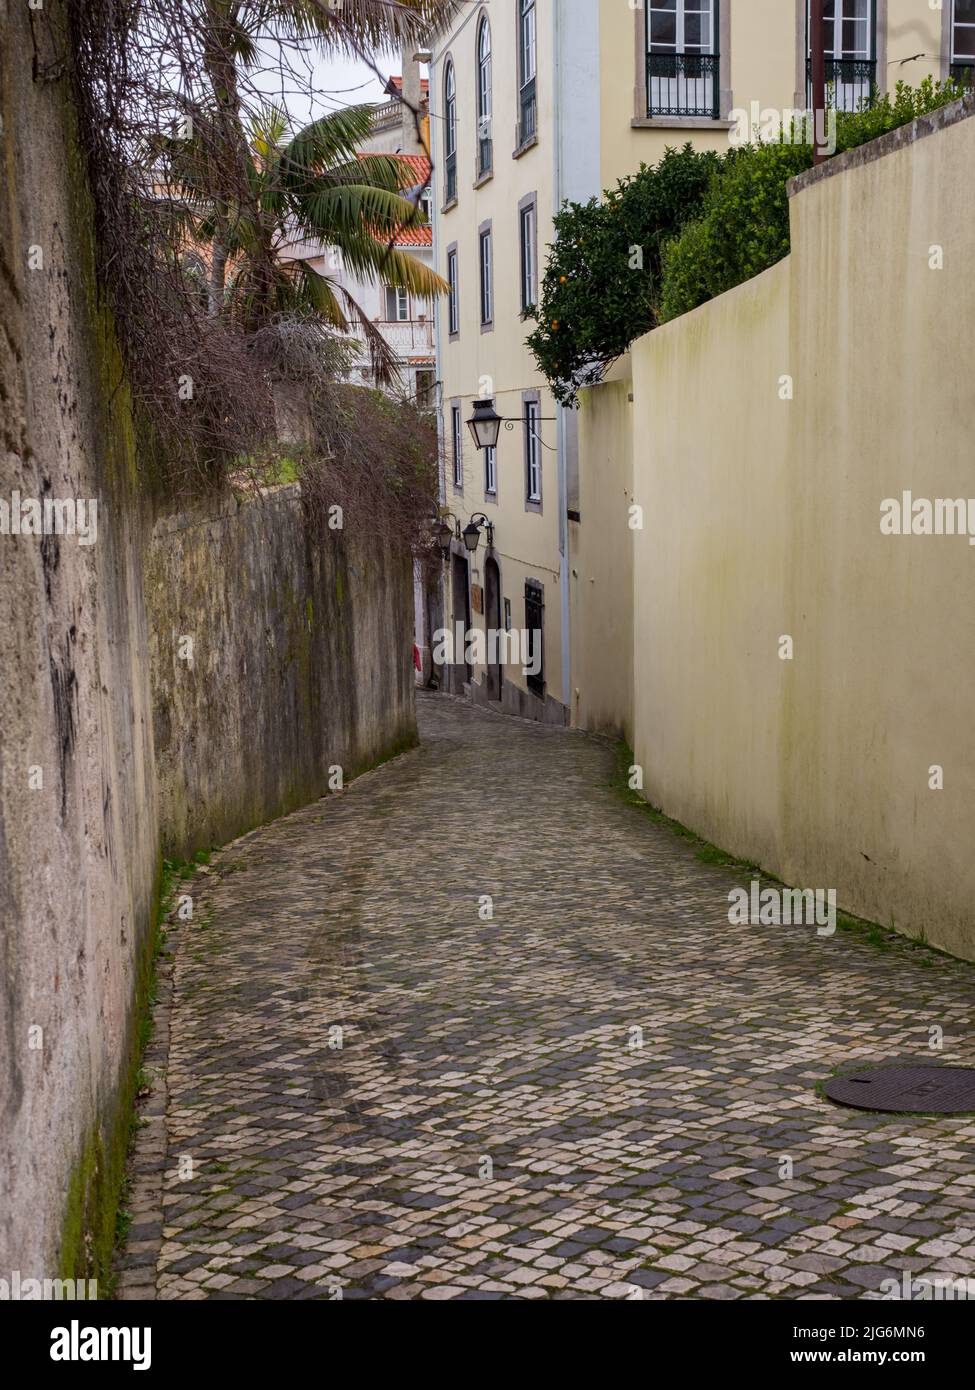 Portugal- Jan 2019: Narrow atmospheric streets in the historic center of Sintra. It is a town in Greater Lisbon region of Portugal, located on the Por Stock Photo